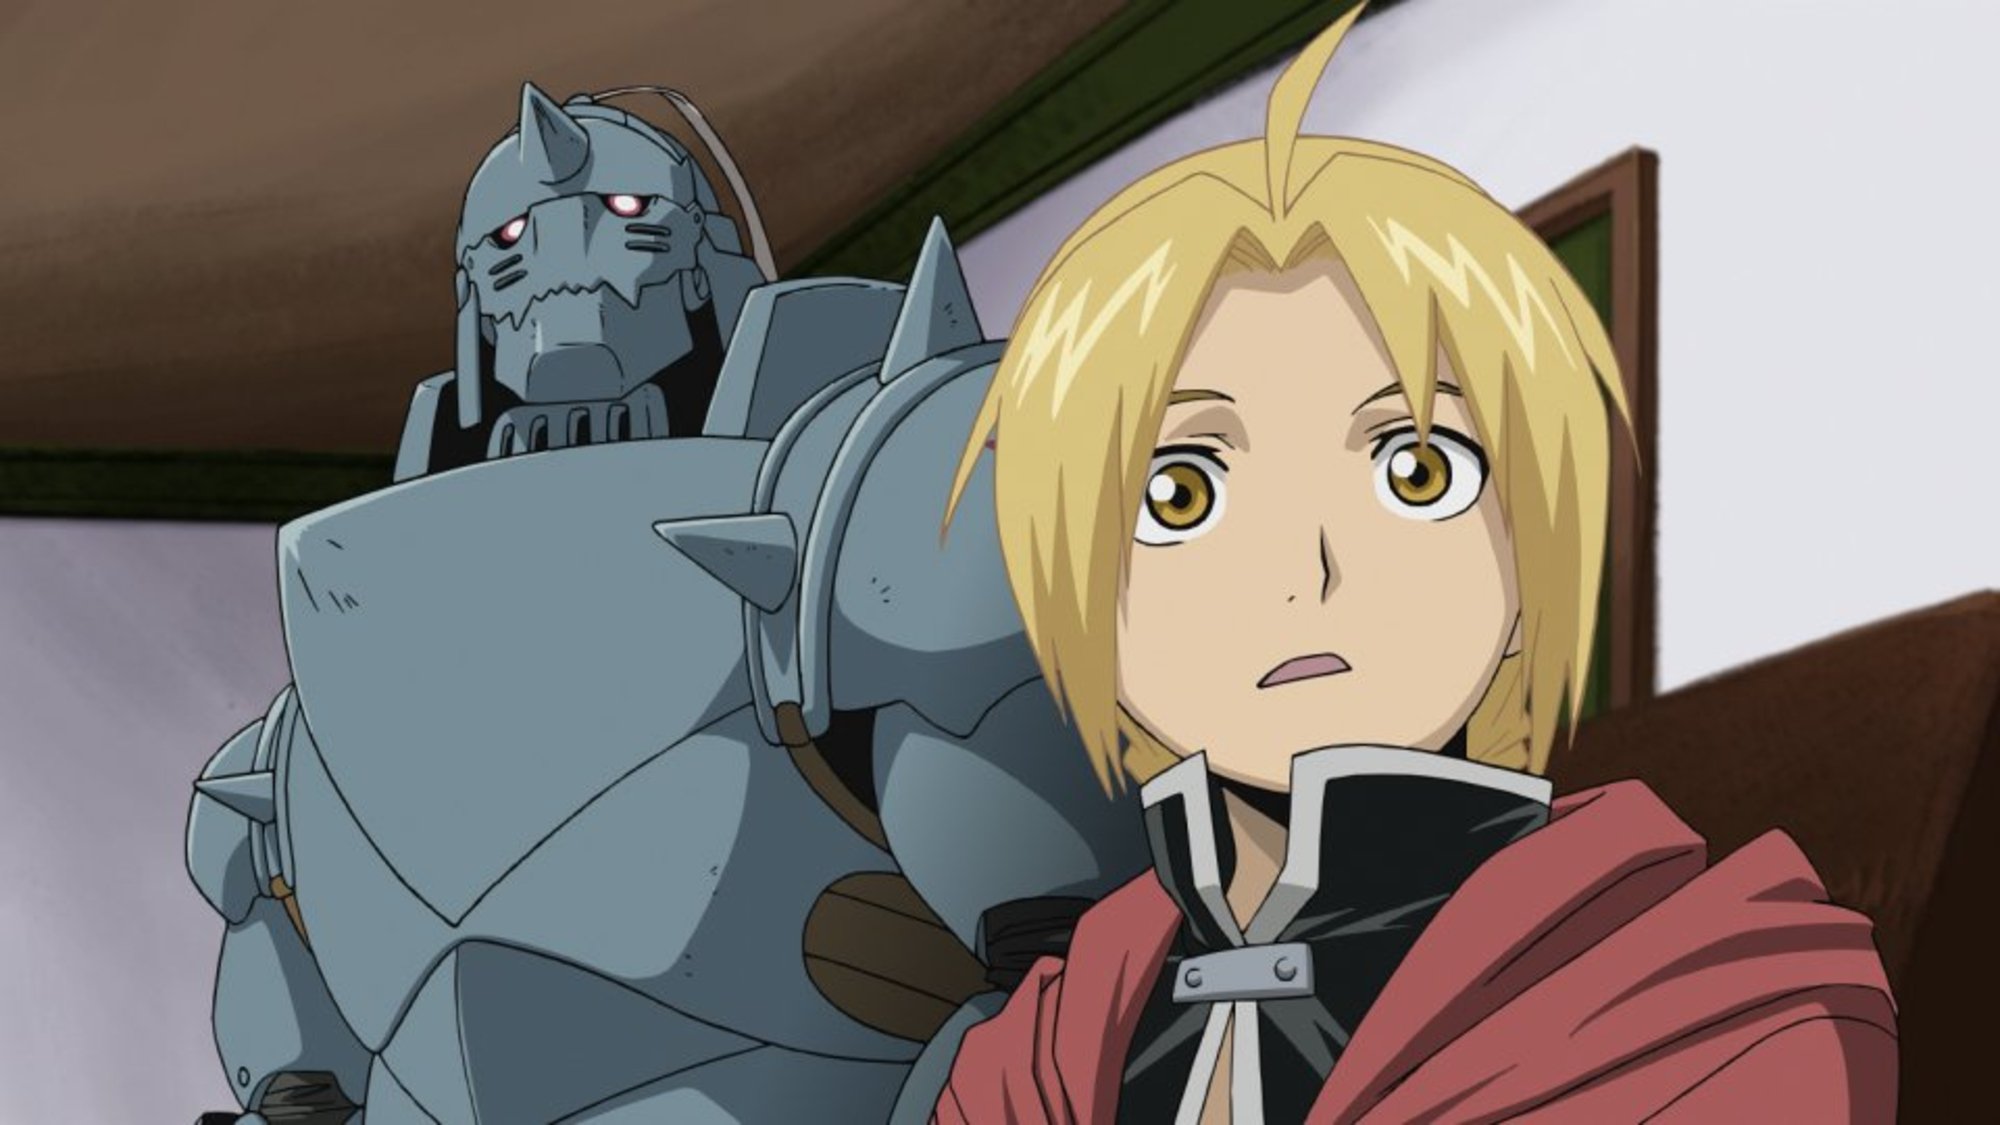 If you like Full Metal Alchemist, these are the best anime series to watch